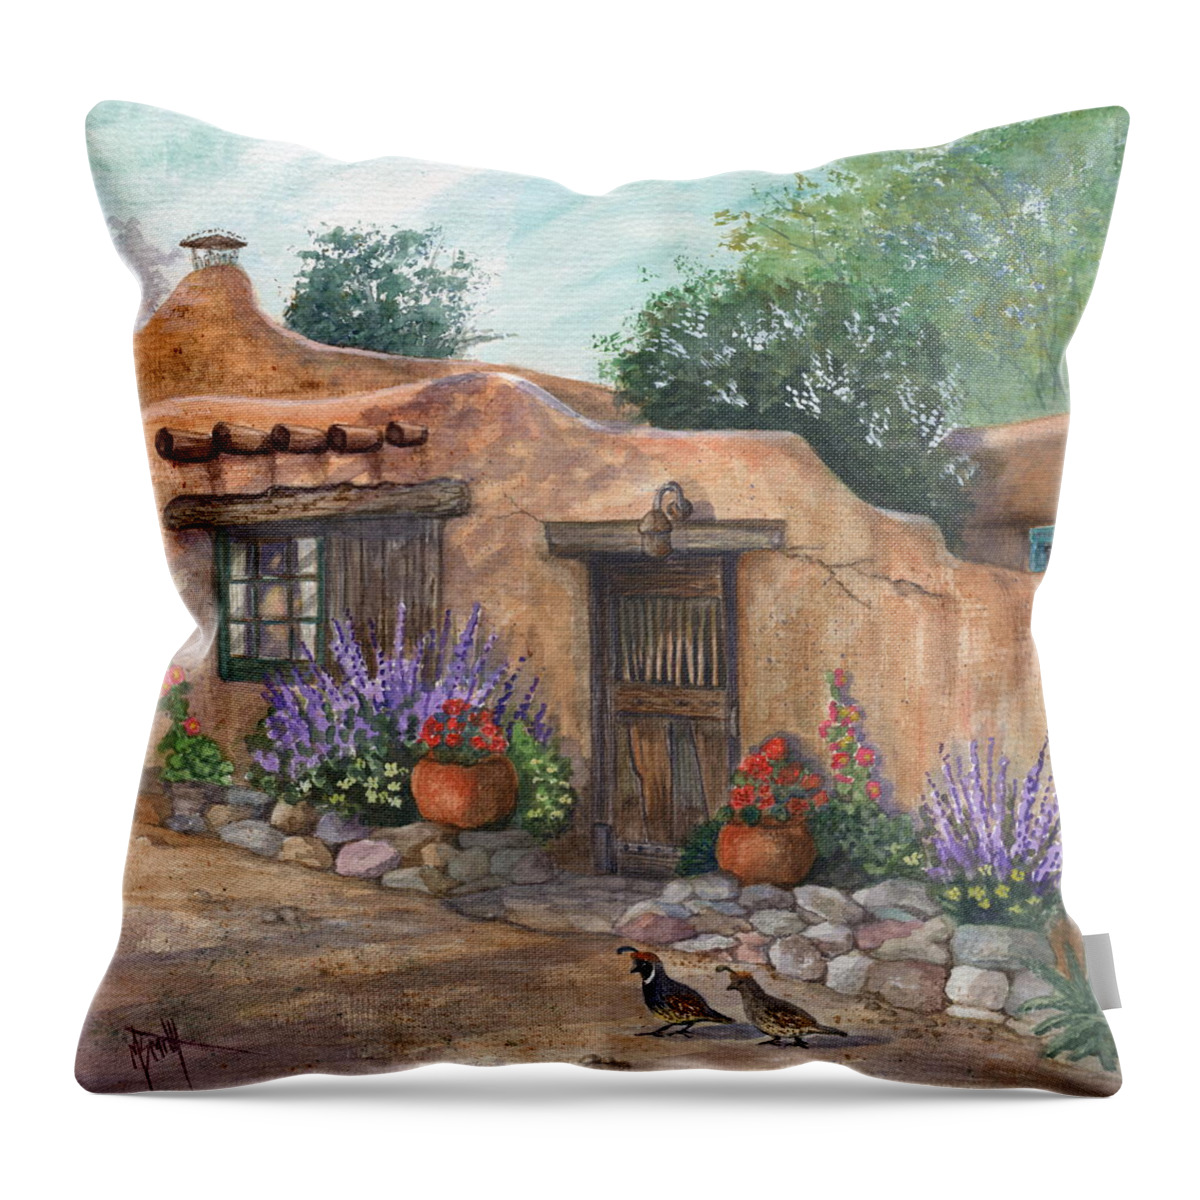 Old Adobe Throw Pillow featuring the painting Old Adobe Cottage by Marilyn Smith